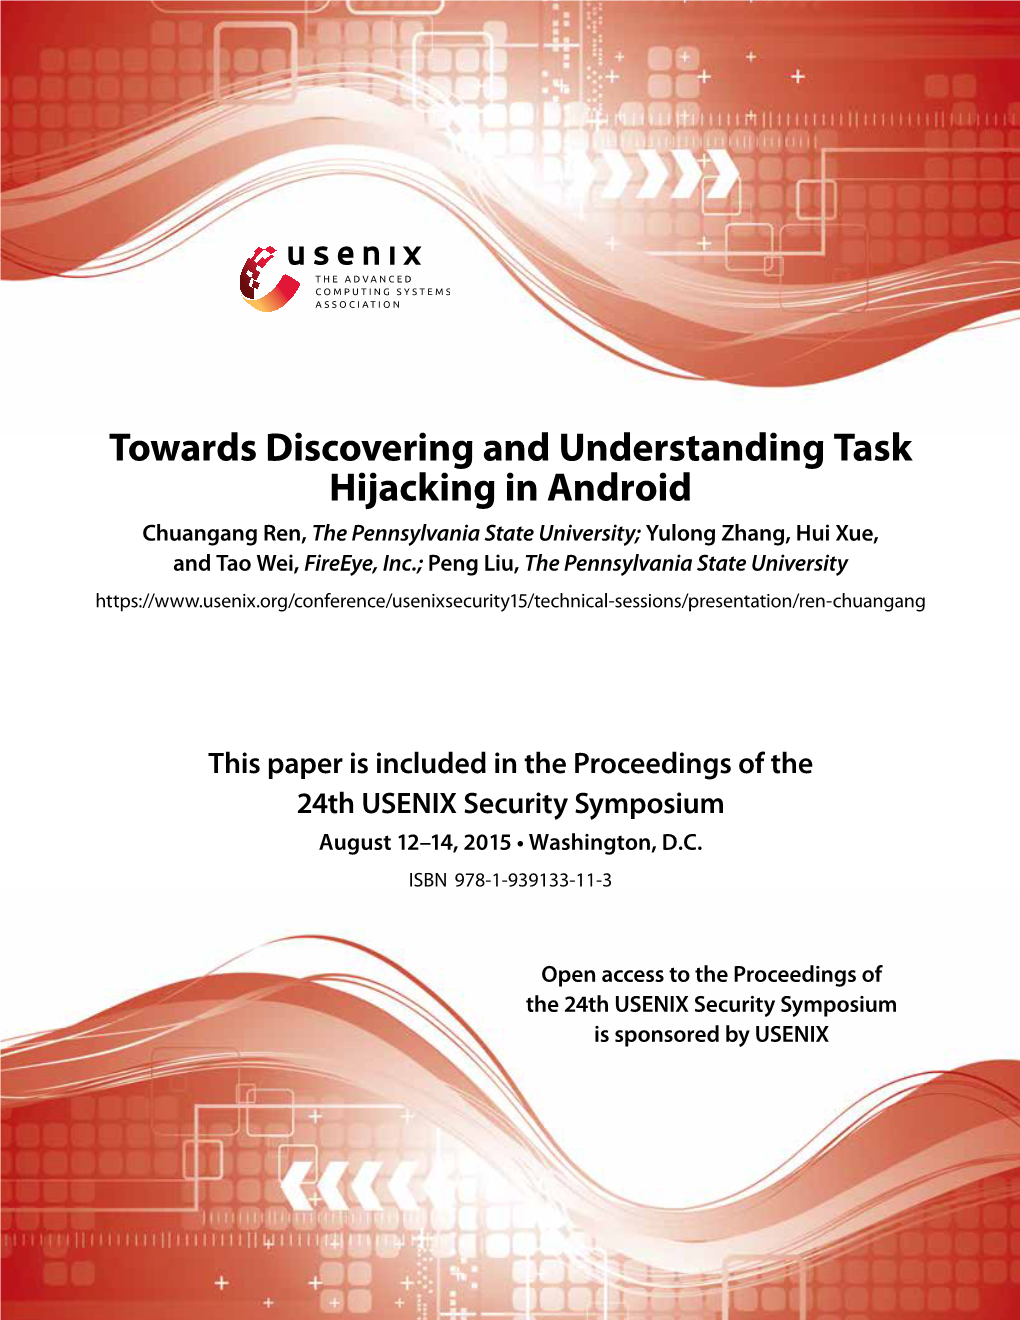 Towards Discovering and Understanding Task Hijacking In